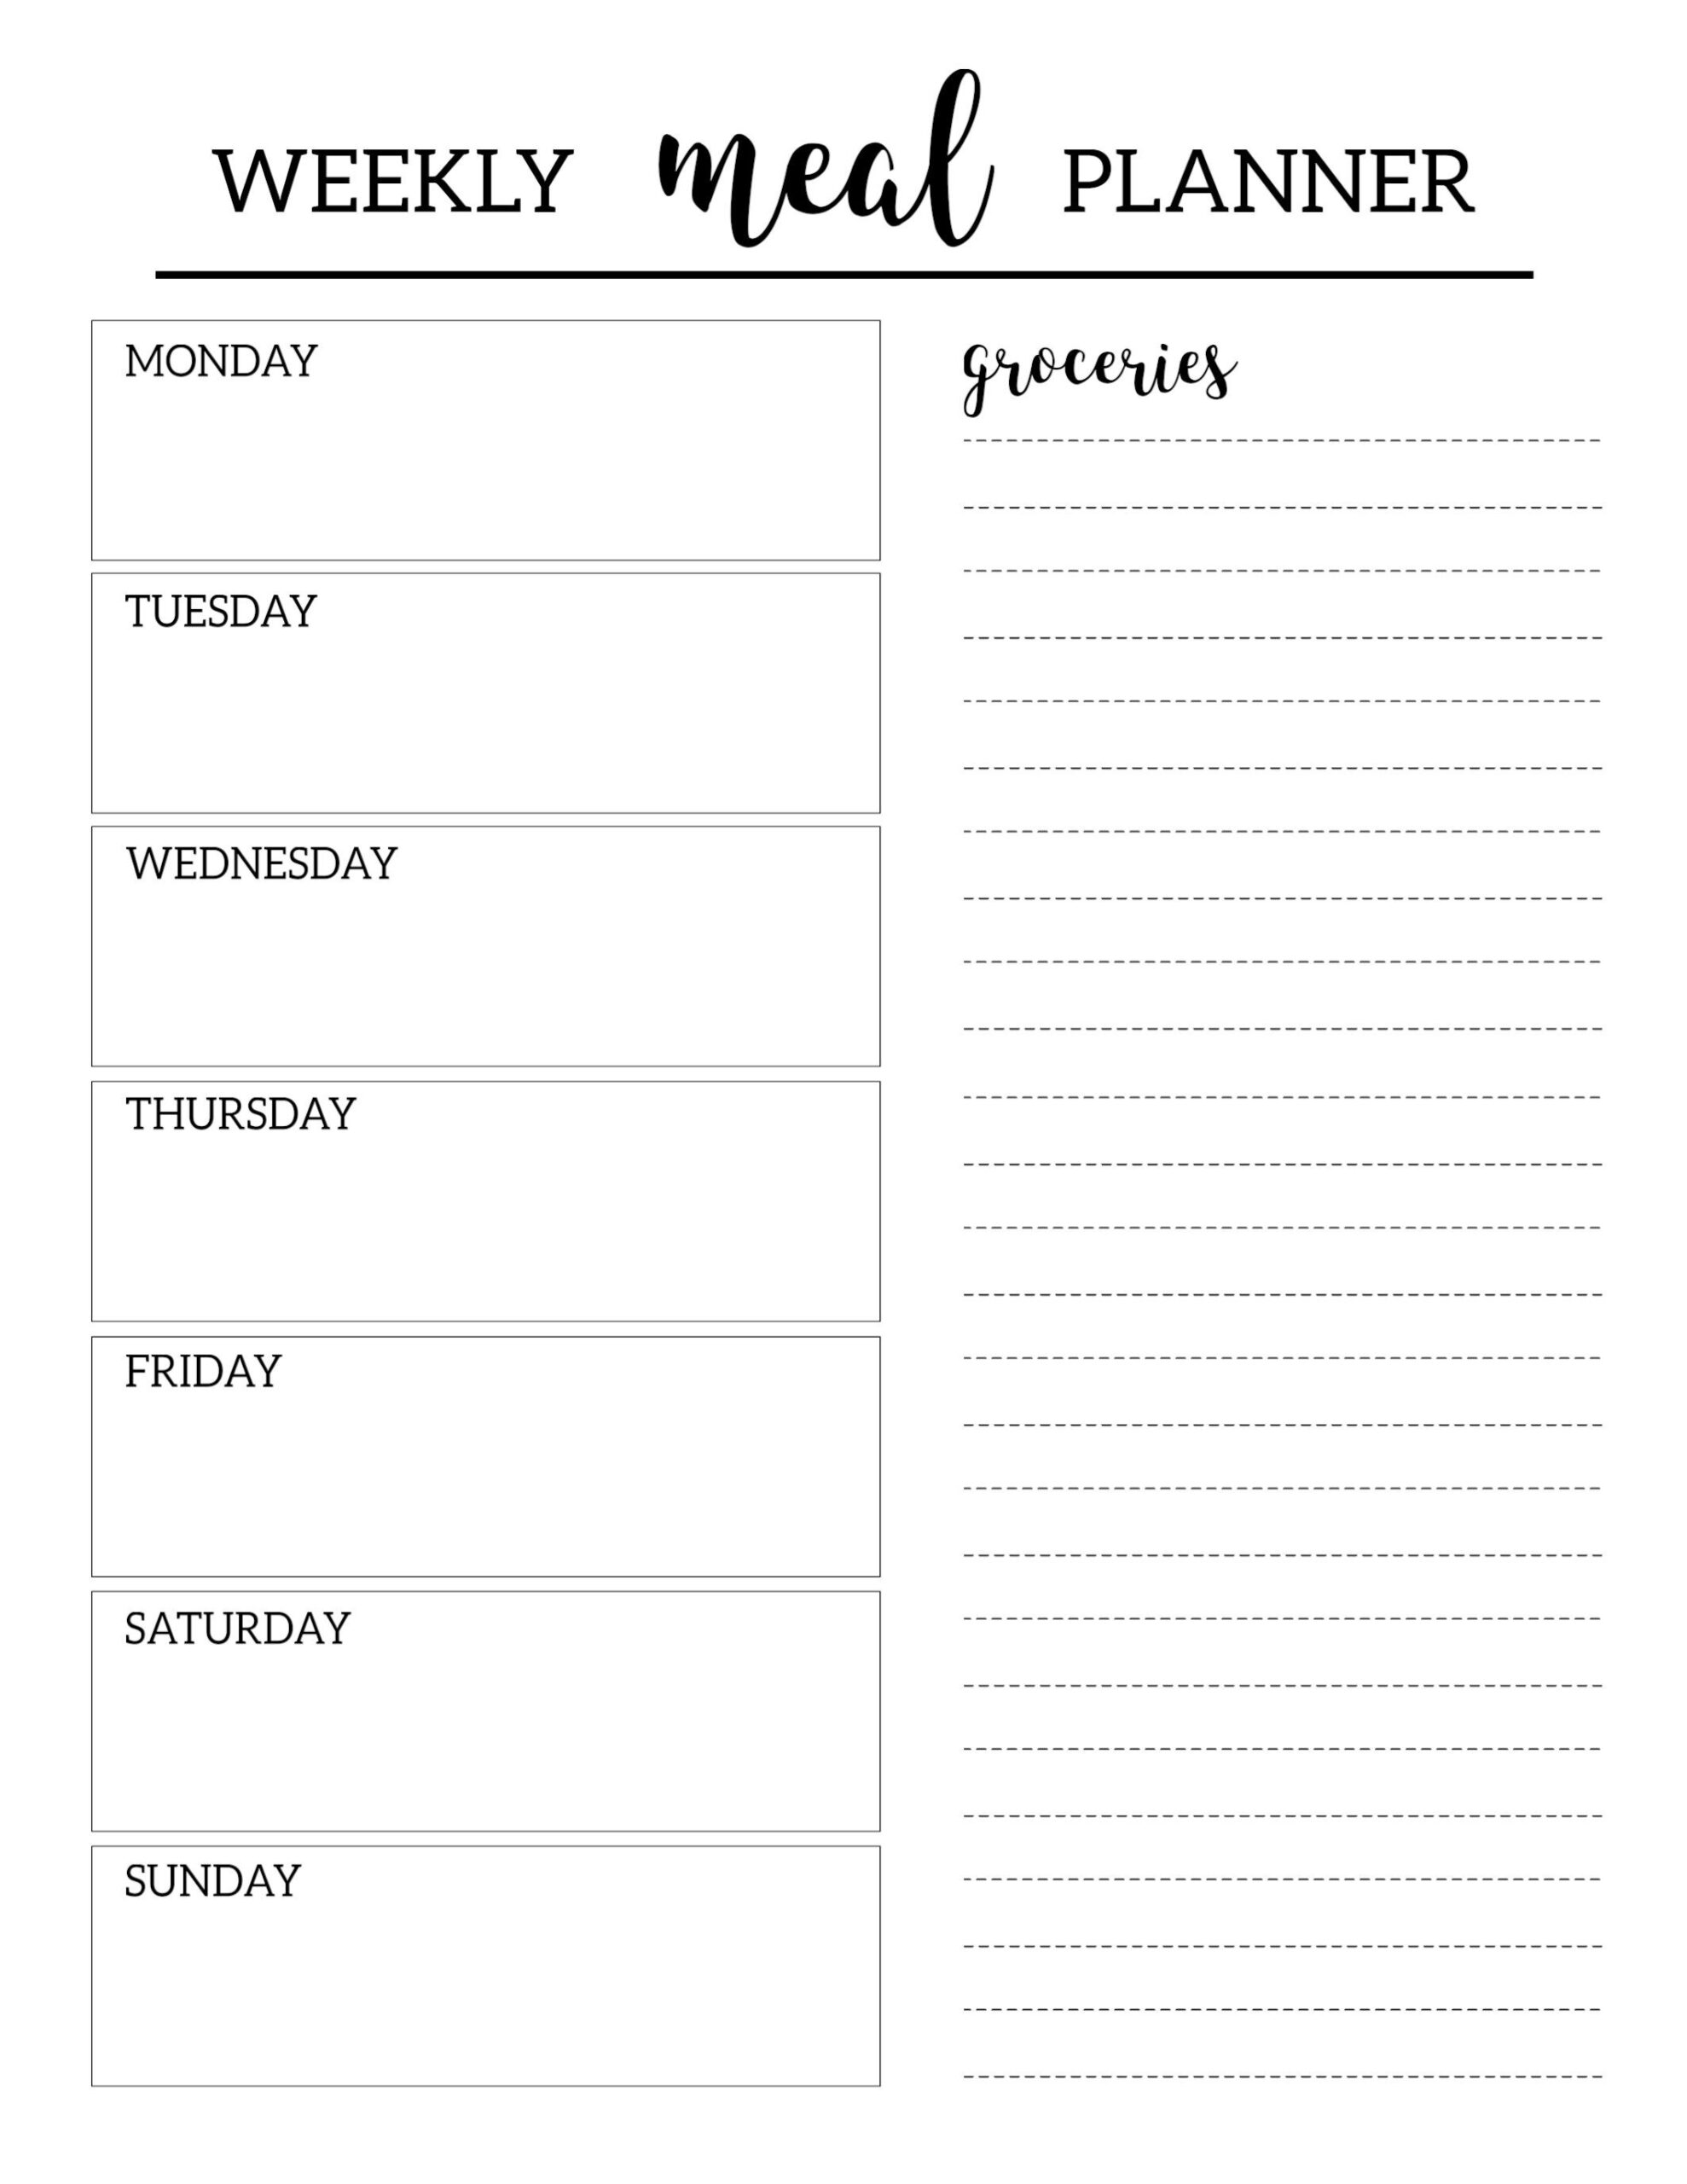 Free Printable Meal Planner Template Paper Trail Design Weekly Meal Planner Template Free Printable Meal Planner Templates Weekly Meal Plan Template